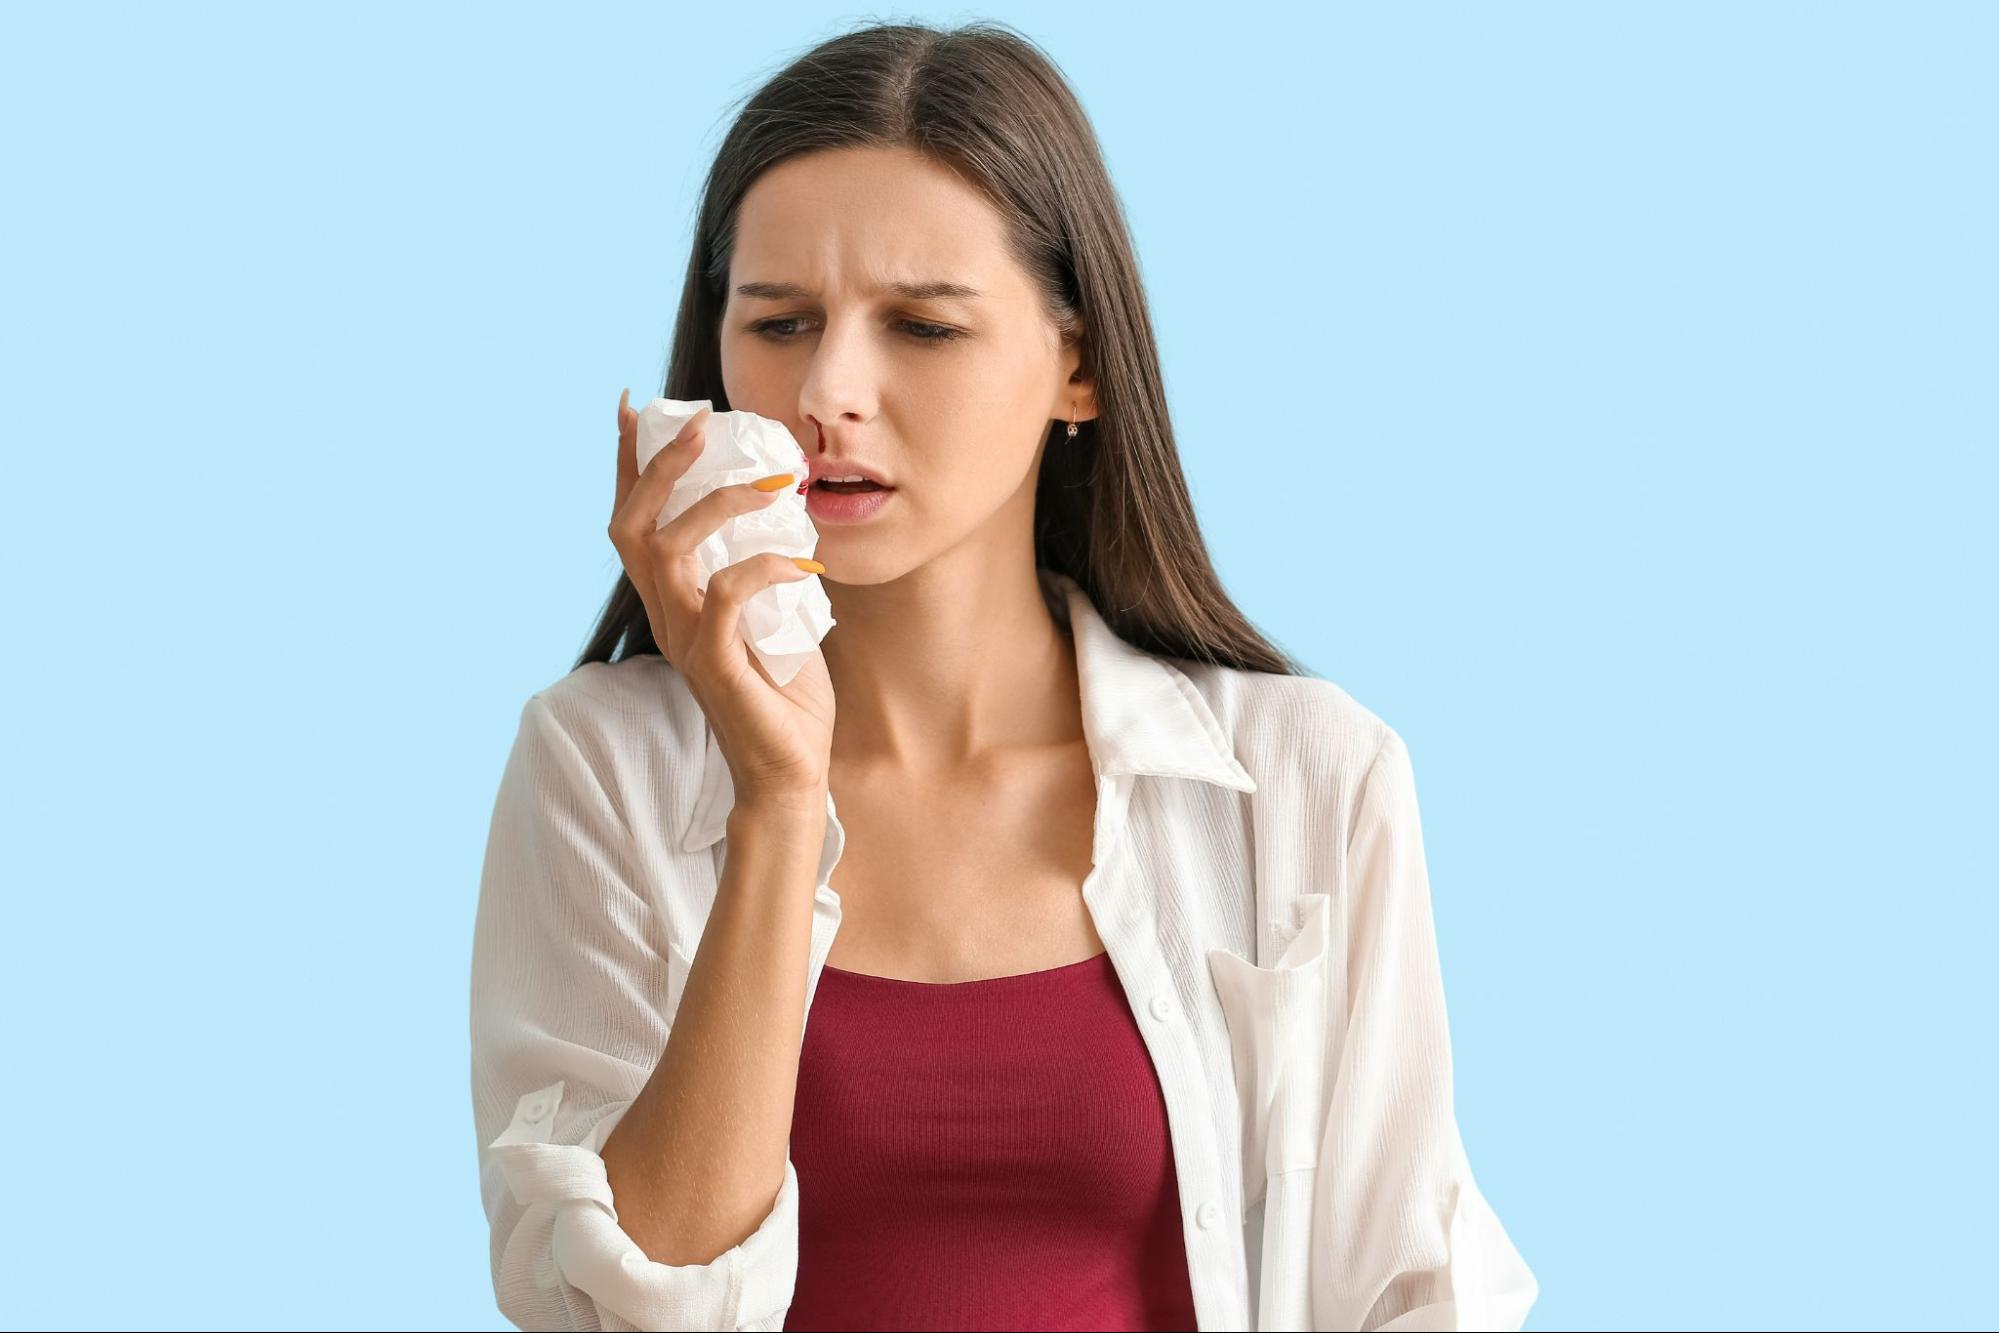 What Is Nosebleed (Epistaxis)? Can It Have Serious Consequences?